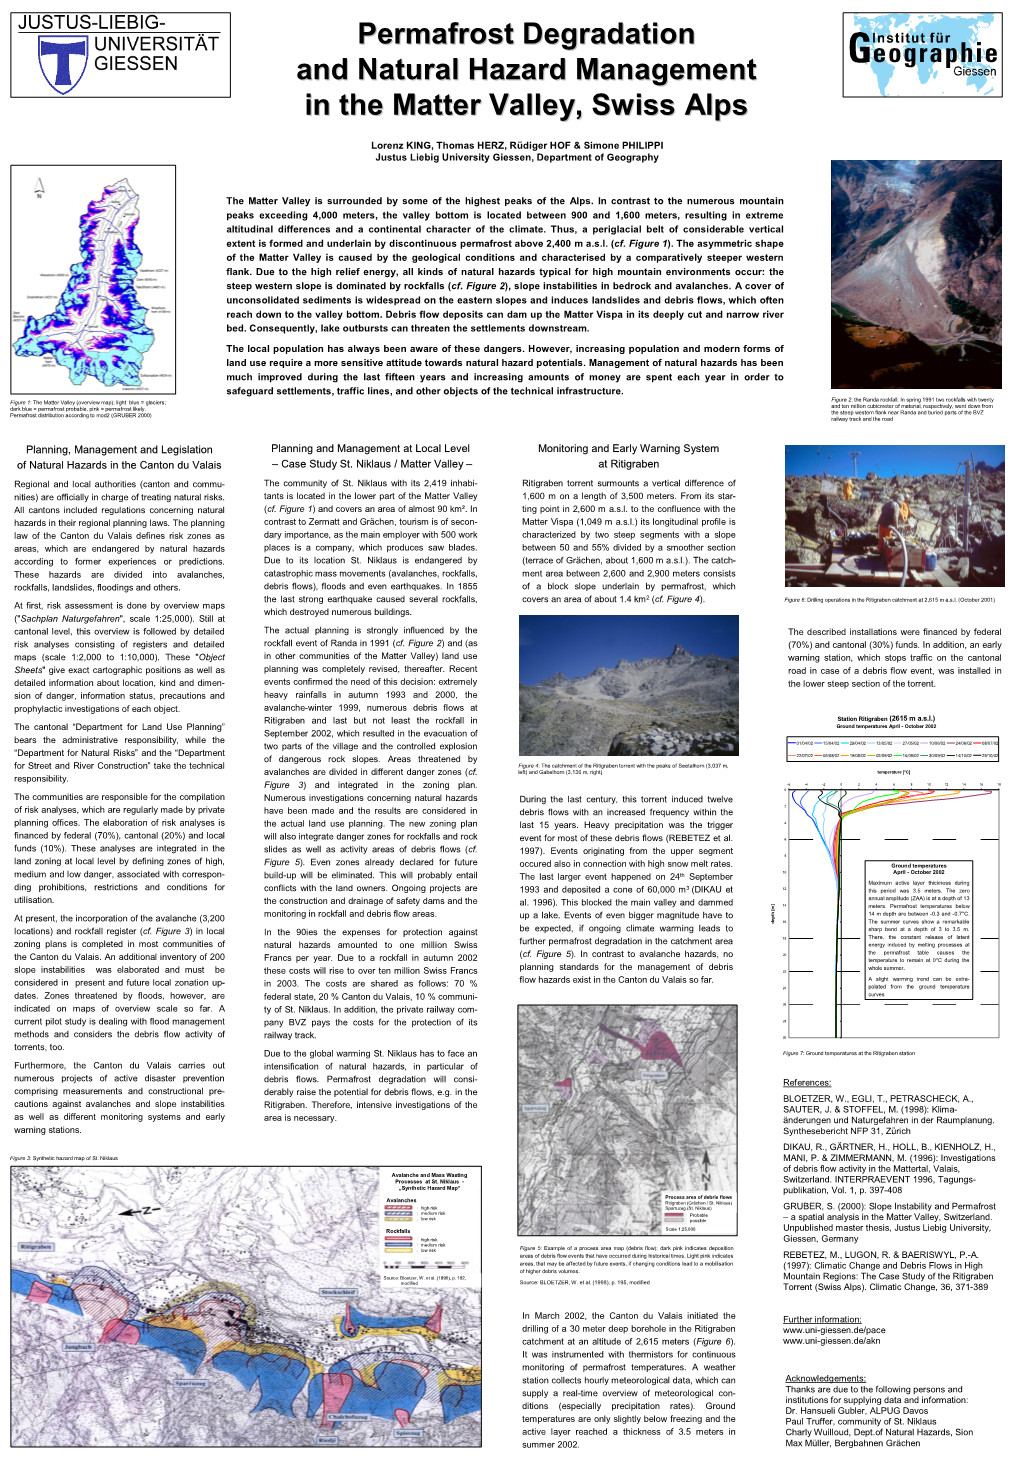 Permafrost Degradation and Natural Hazard Management in the Matter Valley, Swiss Alps